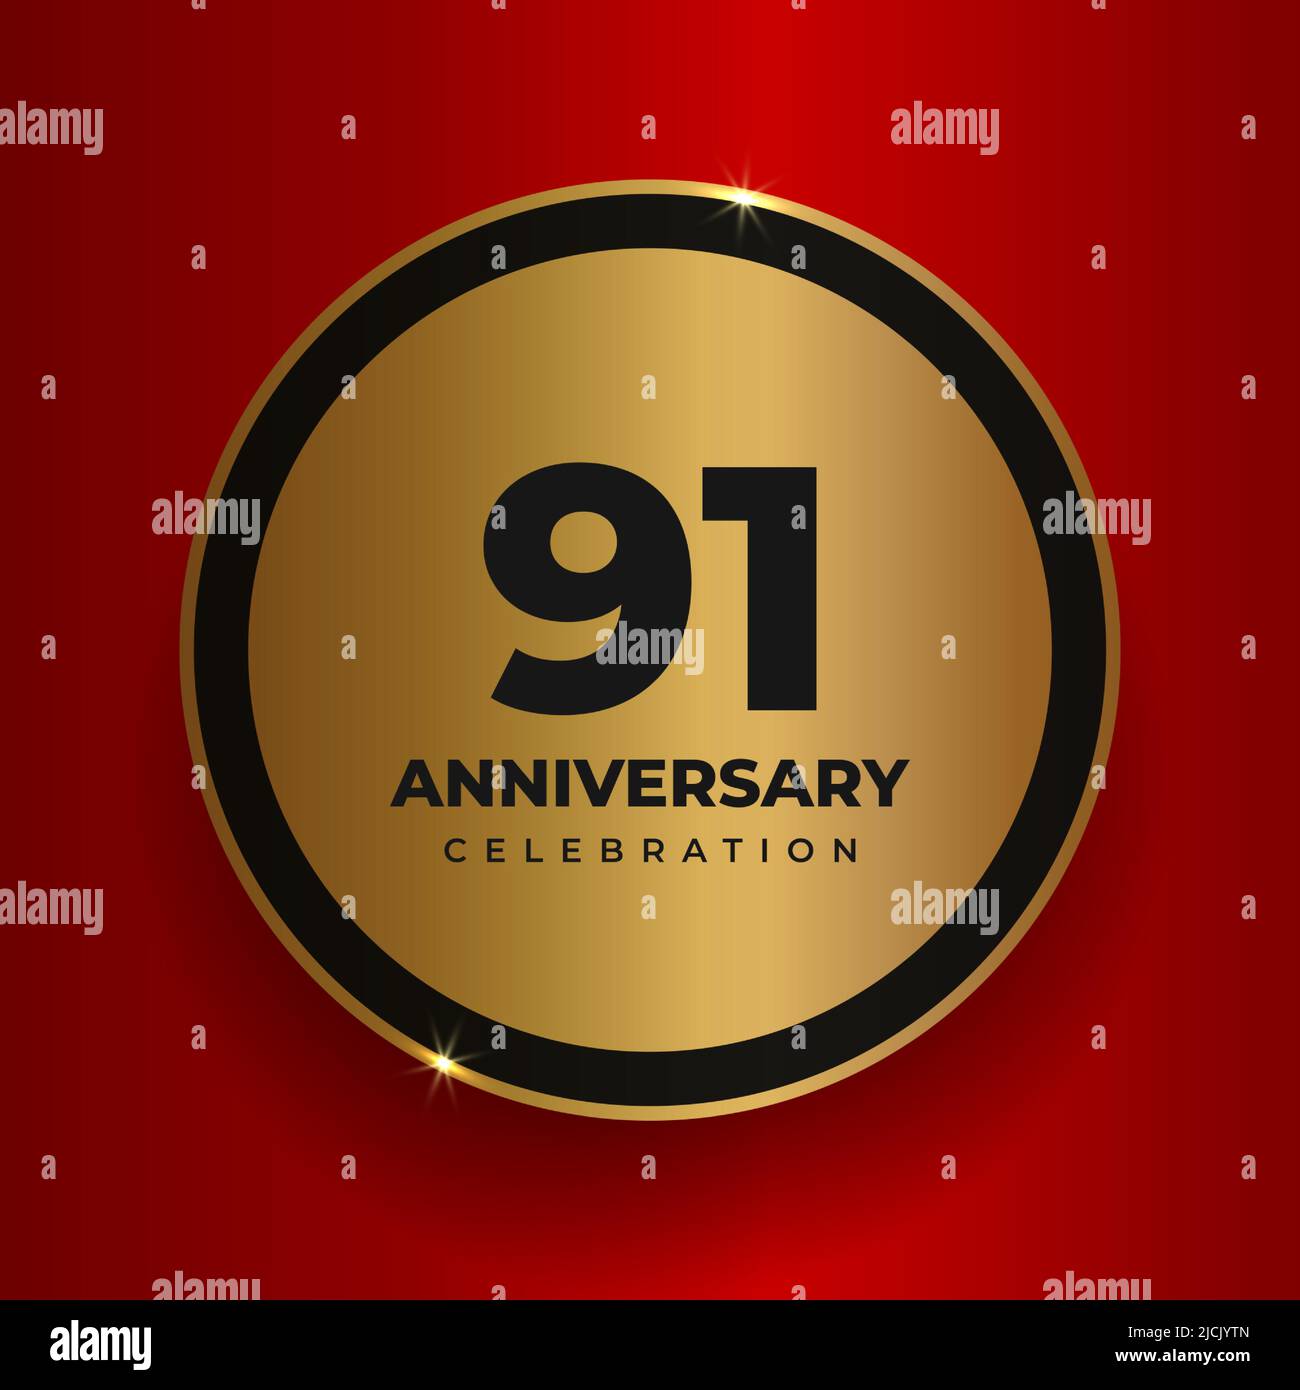 91 years anniversary celebration background. Celebrating 91st anniversary event party poster template. Vector golden circle with numbers and text on Stock Vector